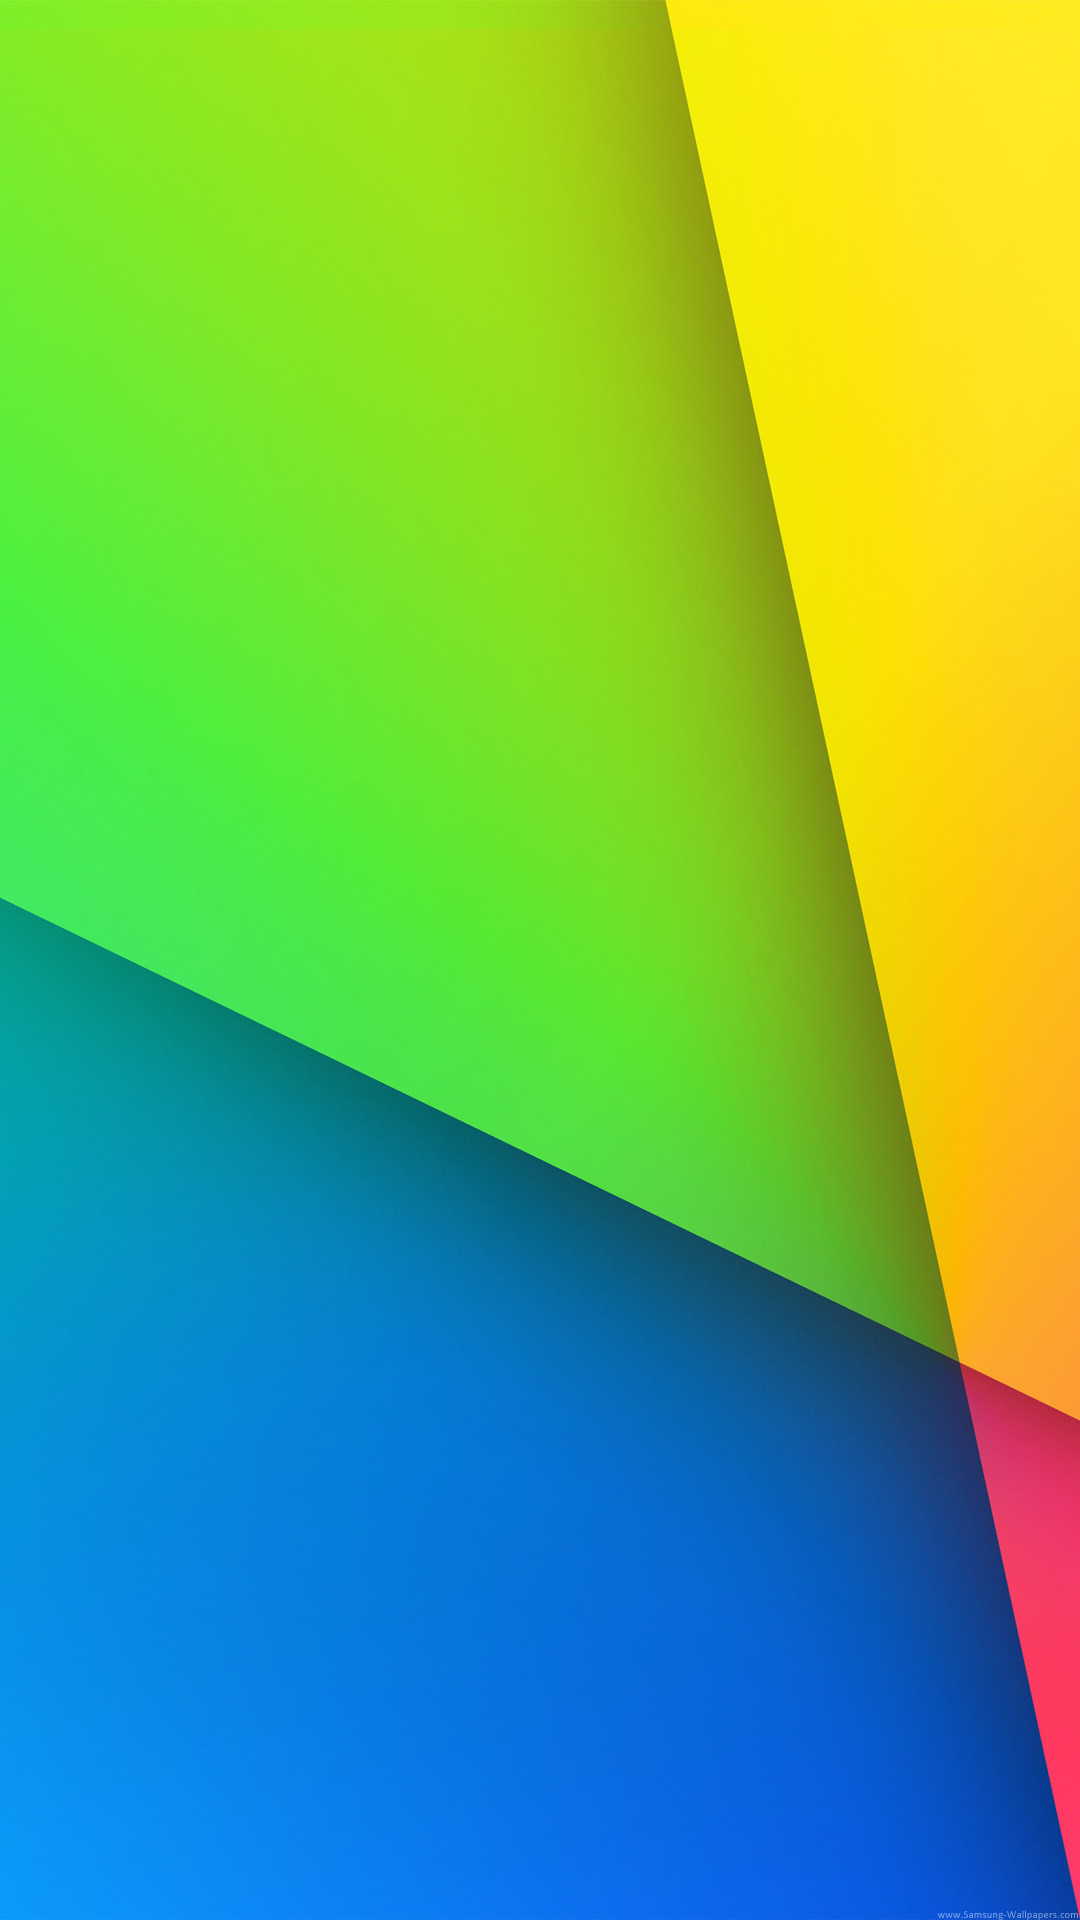 1080x1920 Download these beautiful Nexus wallpapers here